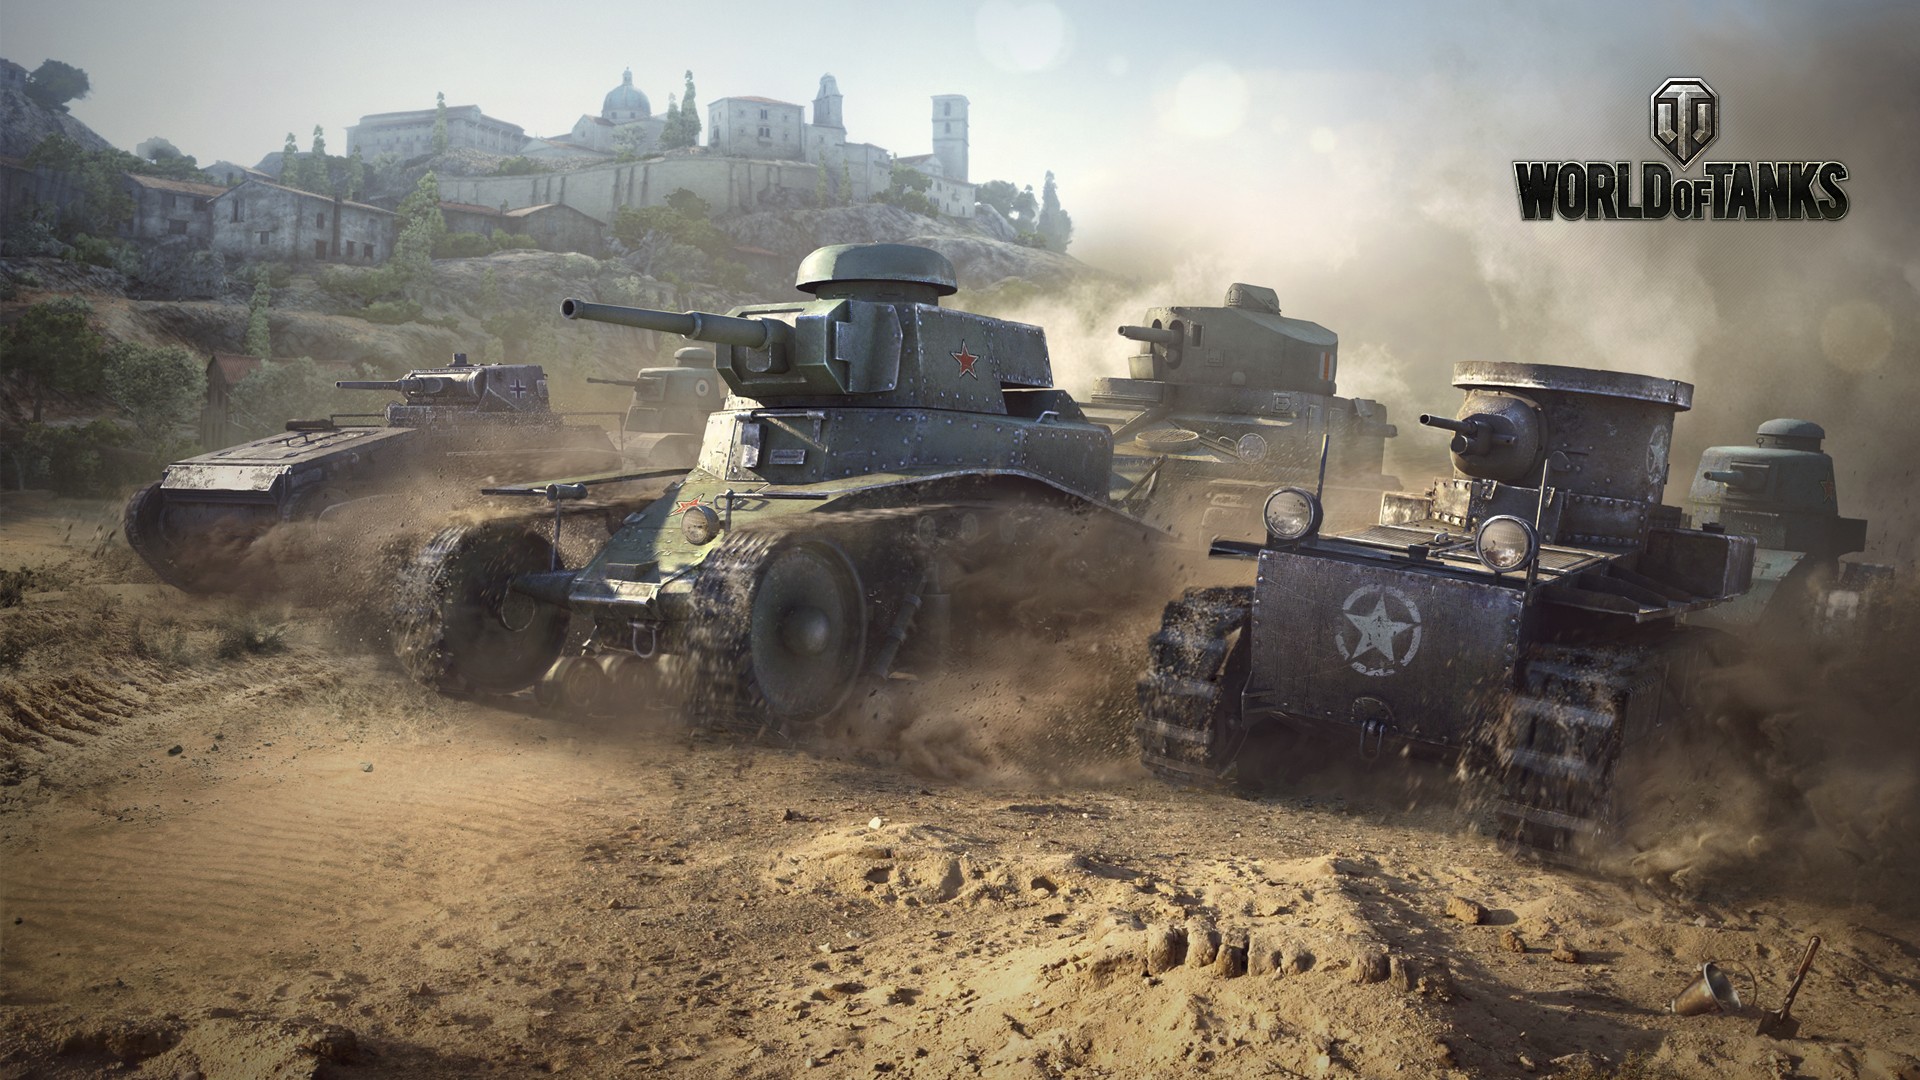 General 1920x1080 World of Tanks tank dust military PC gaming vehicle military vehicle